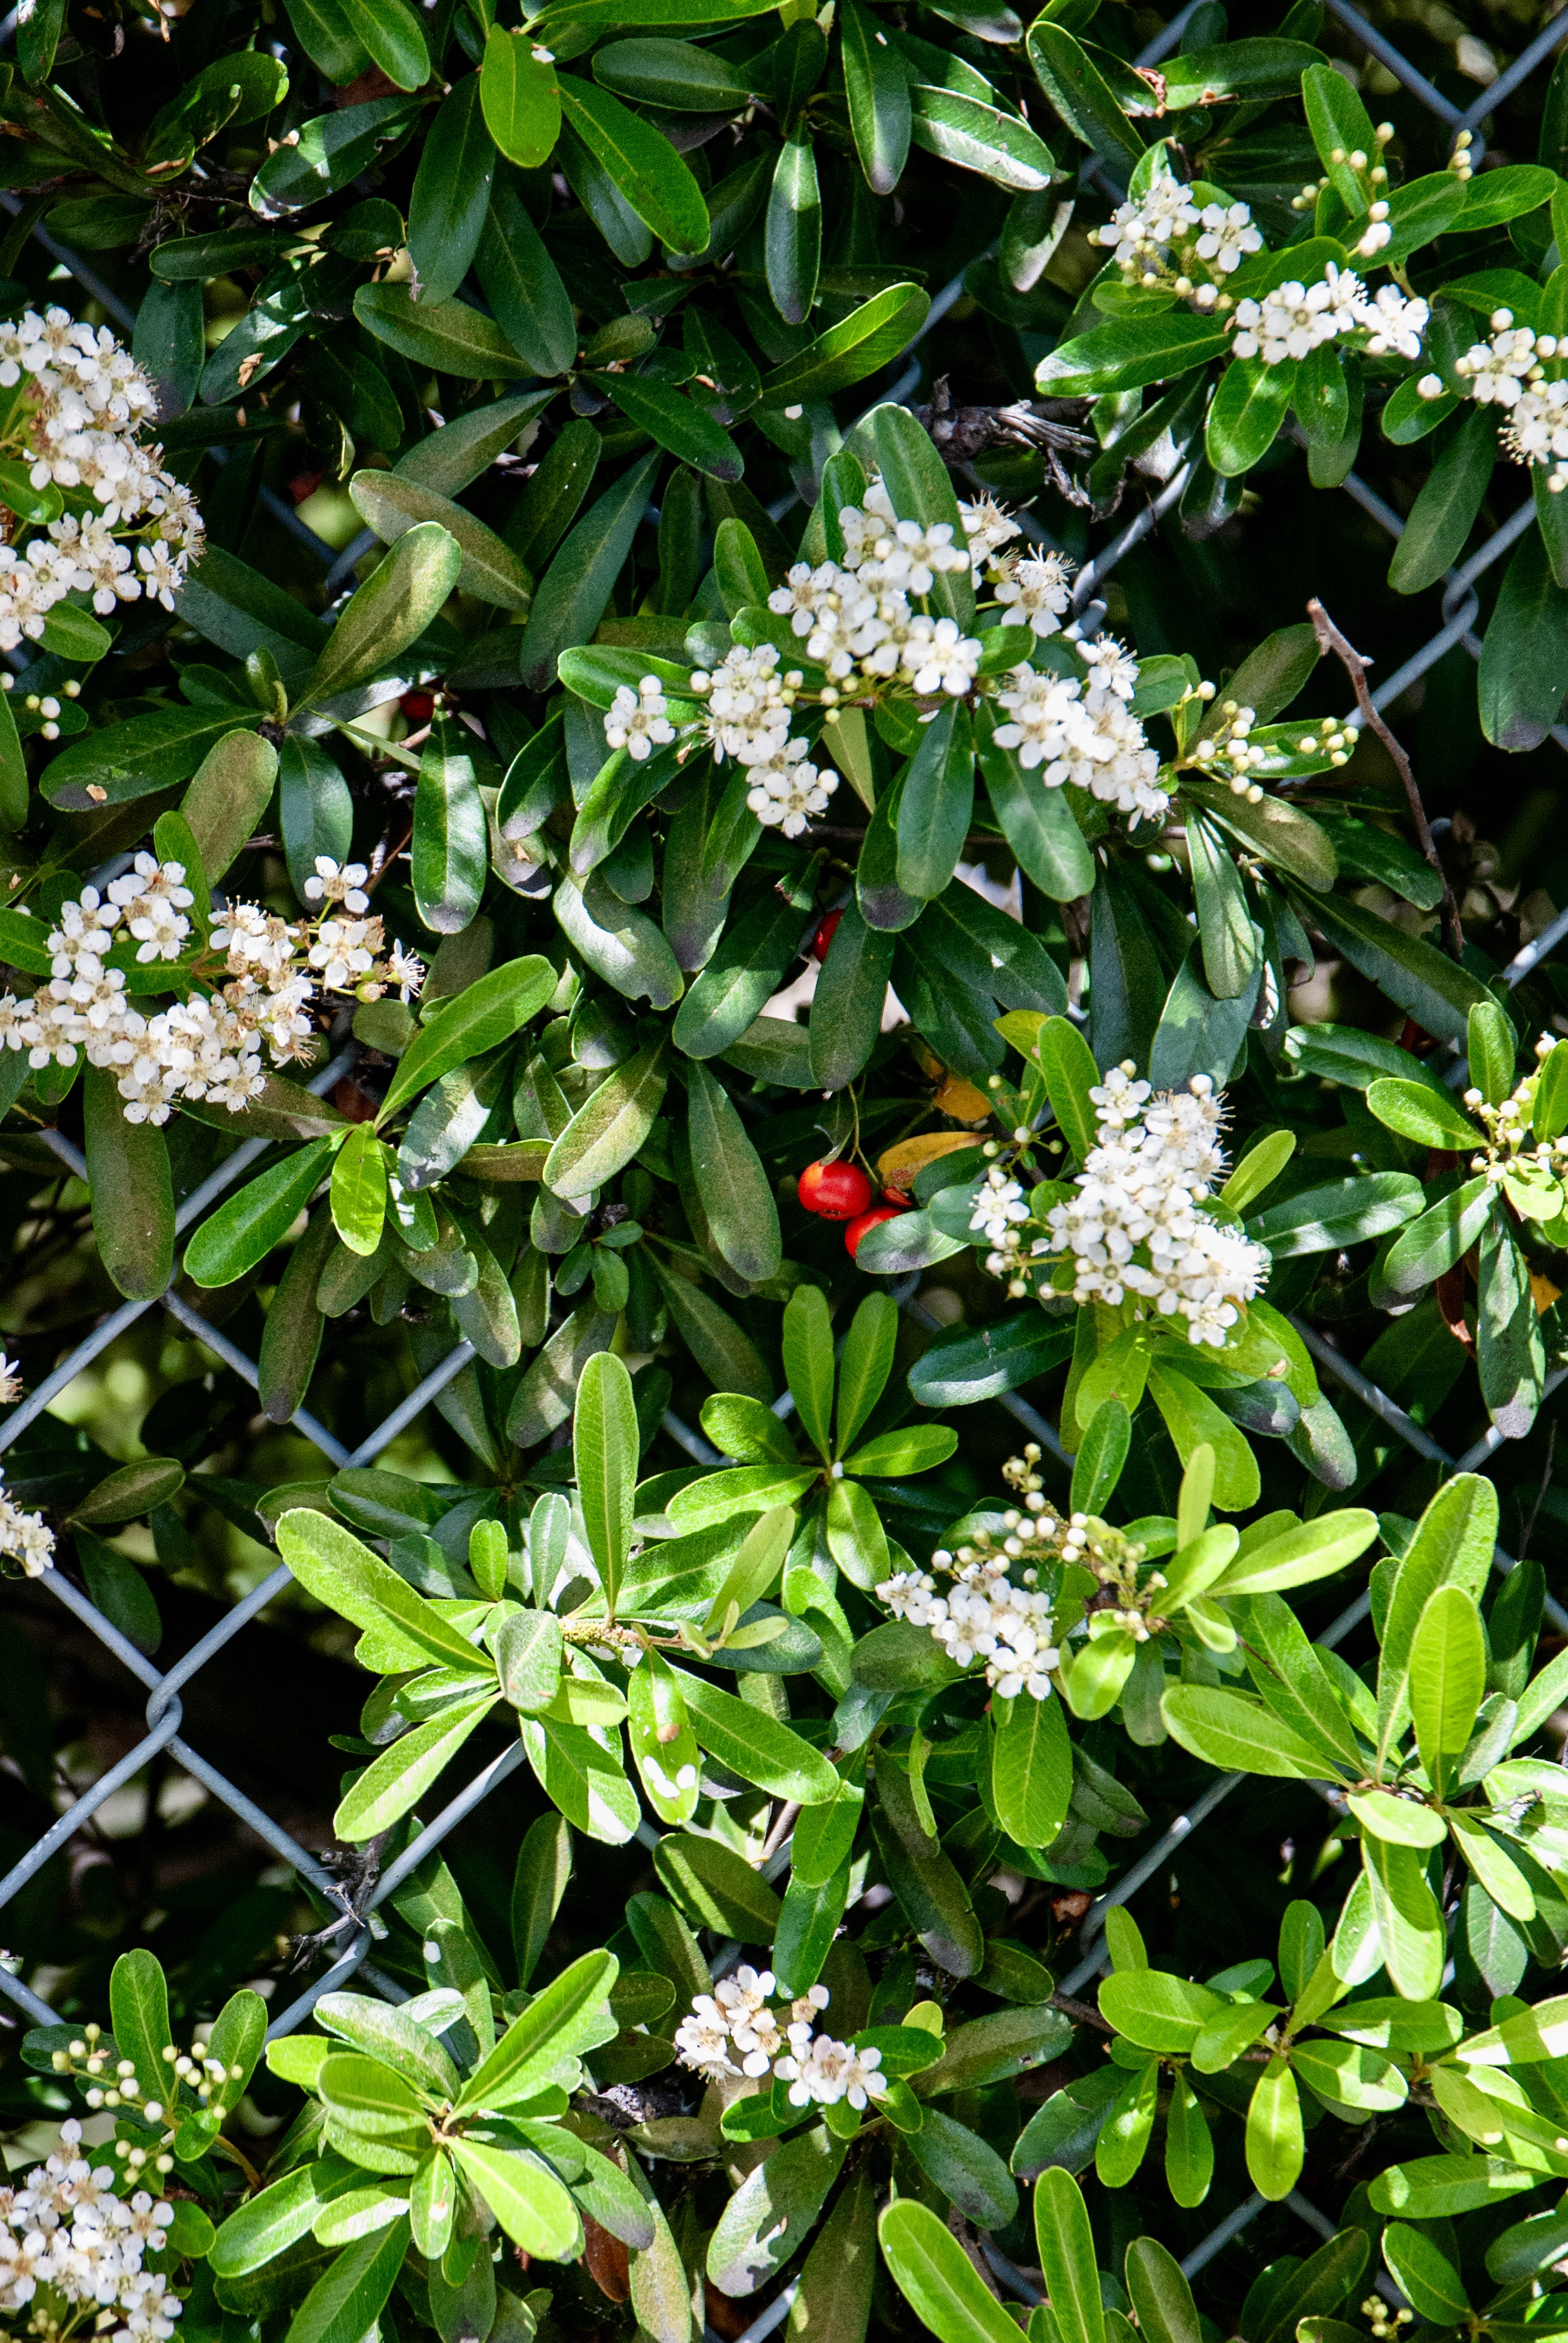 Holly growing through a chain link fence.